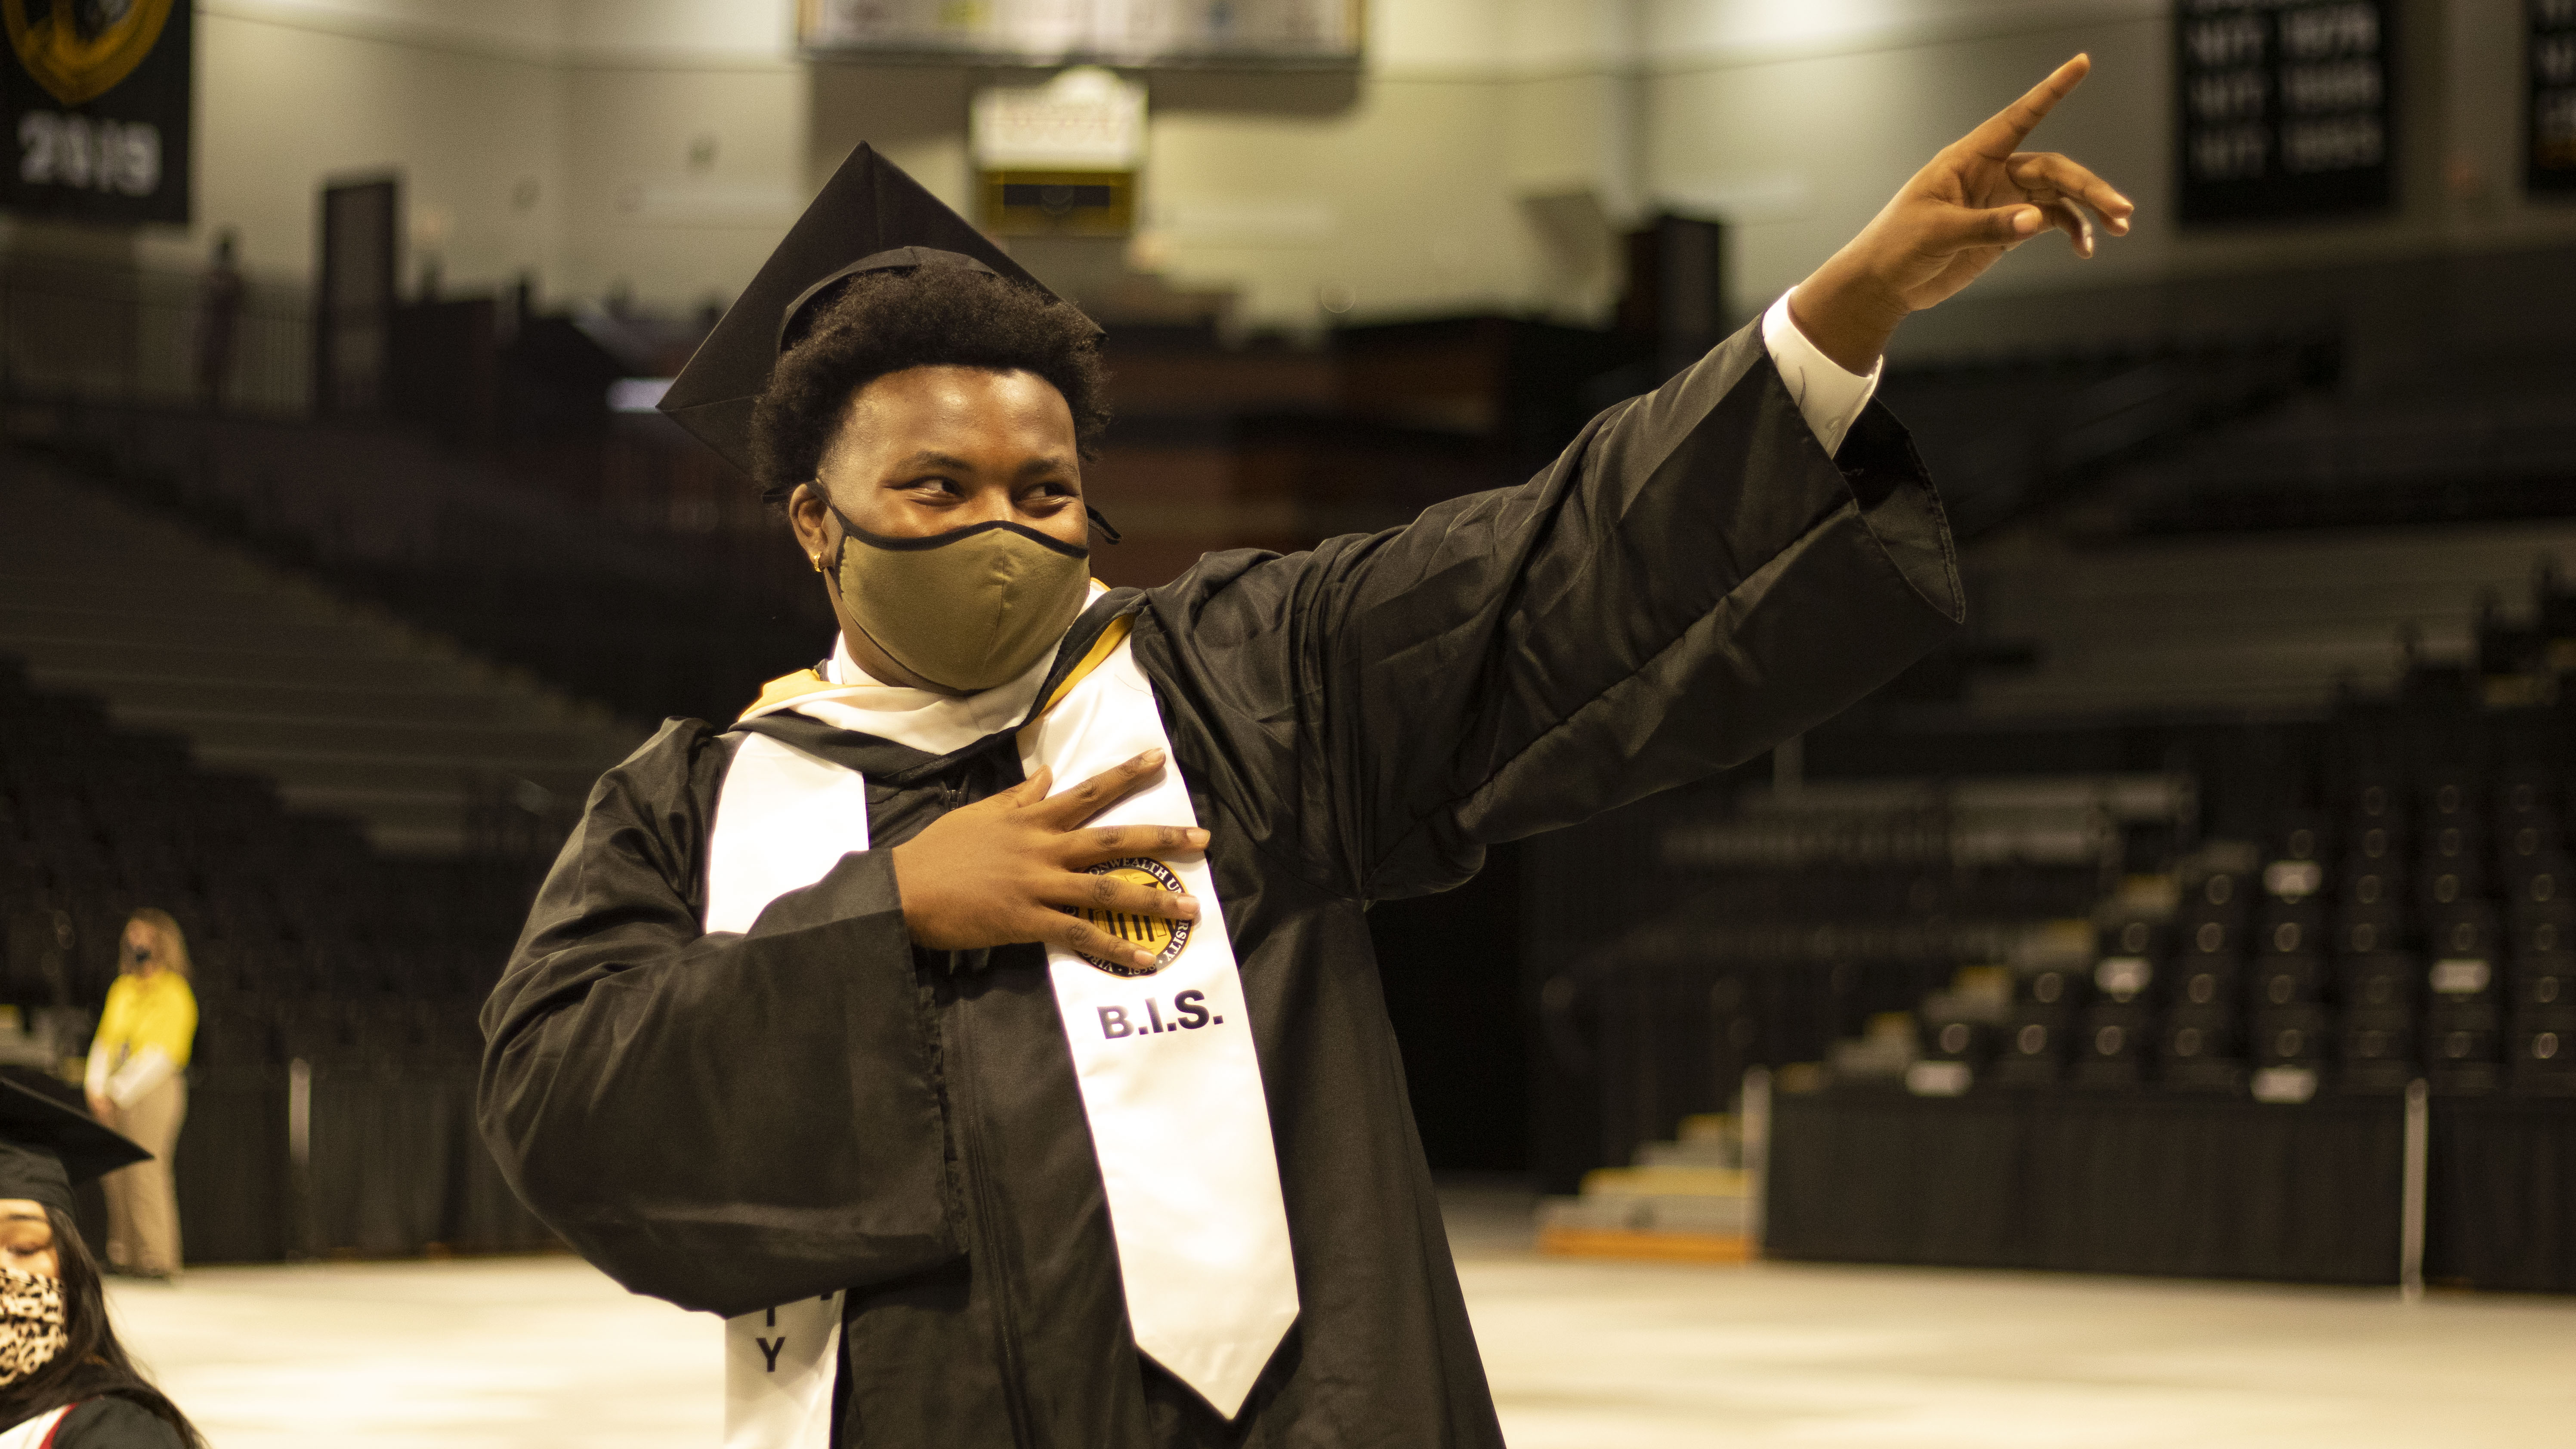 A man in graduation regalia wearing a face mask makes a hand gesture of celebration